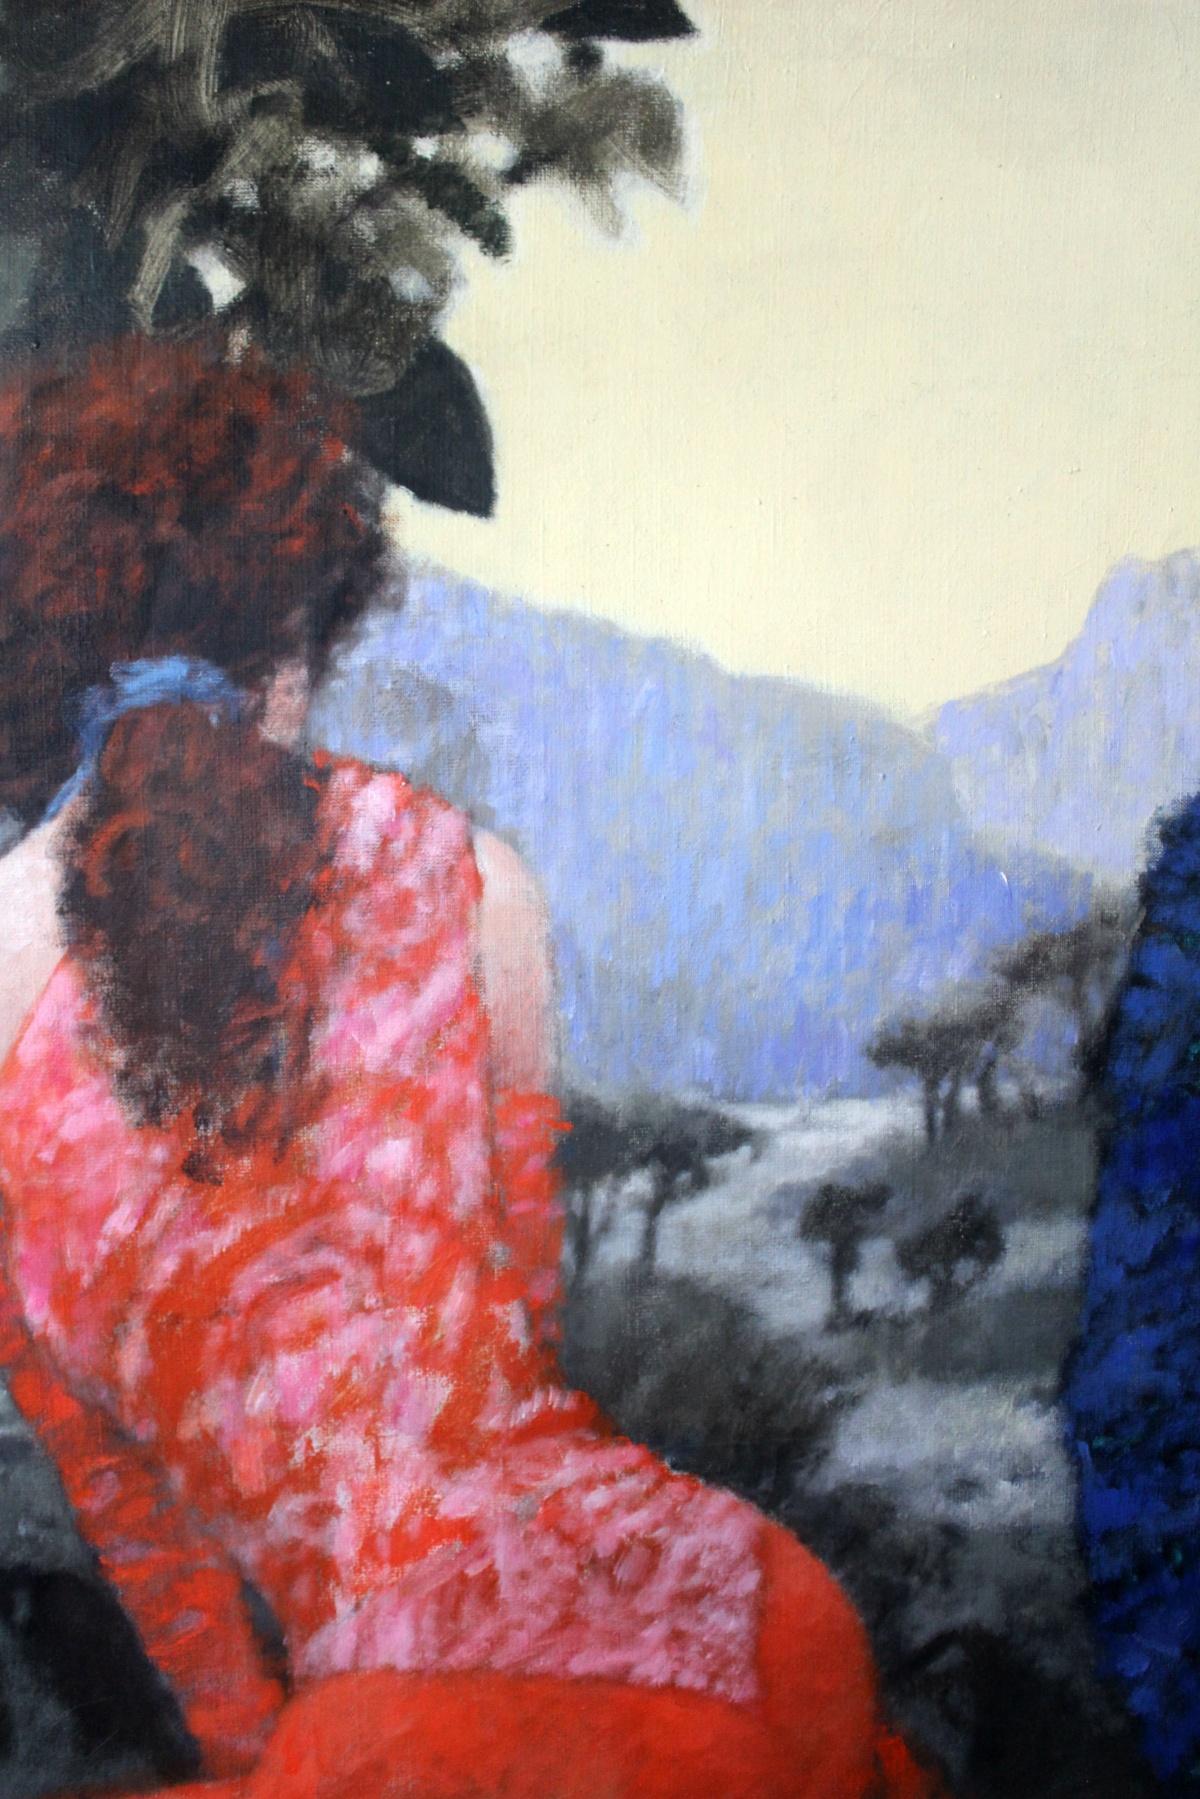 A meeting - Figurative oil painting, A couple, Landscape, Blue & red - Painting by Adam Marczukiewicz